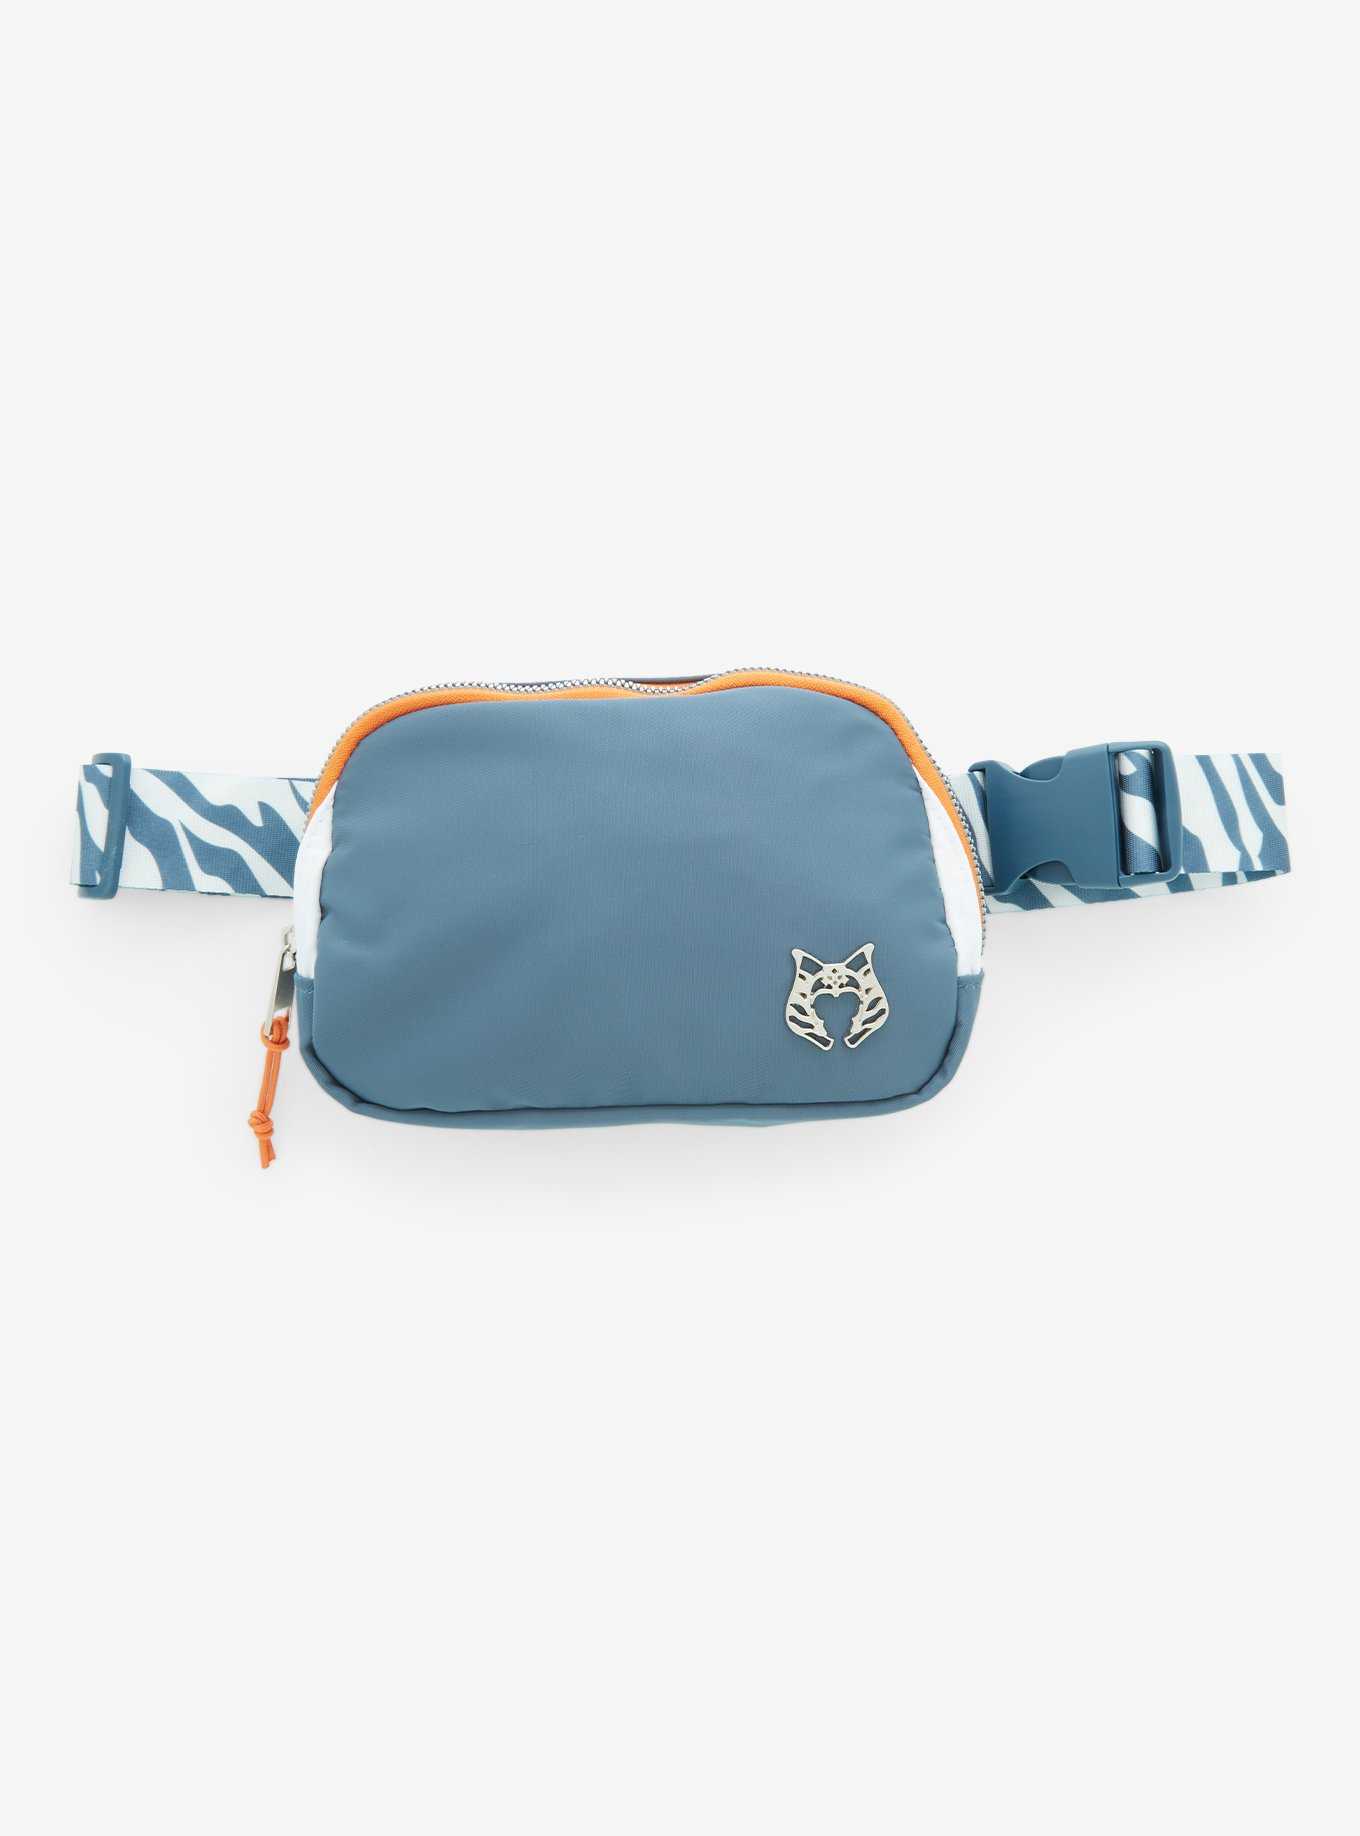 Her Universe Star Wars Ahsoka Tano Montrals Hip Pack Her Universe Exclusive, , hi-res